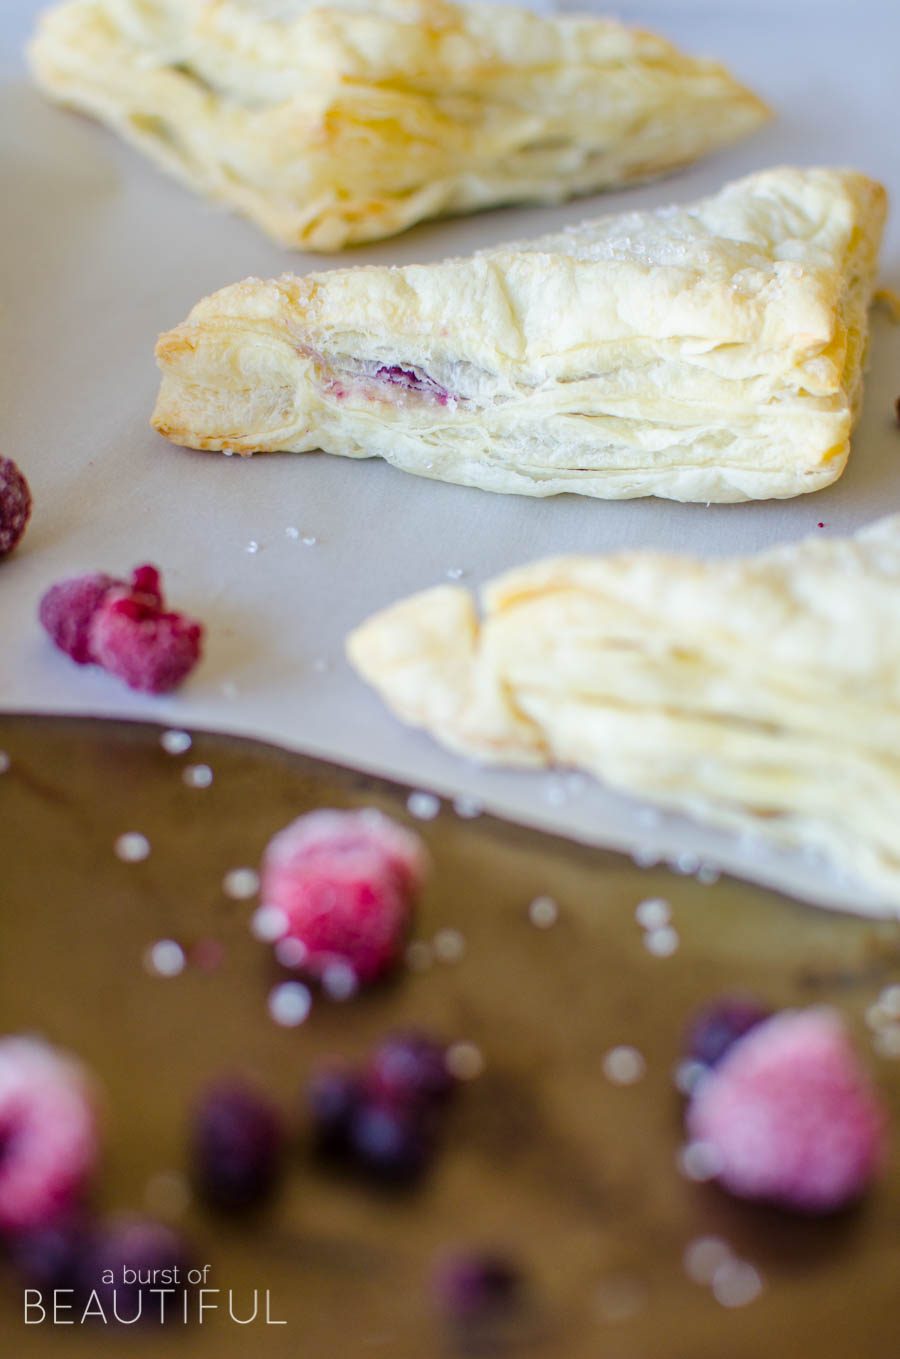 These homemade berry turnovers are a simple and family favorite recipe and taste delicious made with fresh or frozen berries